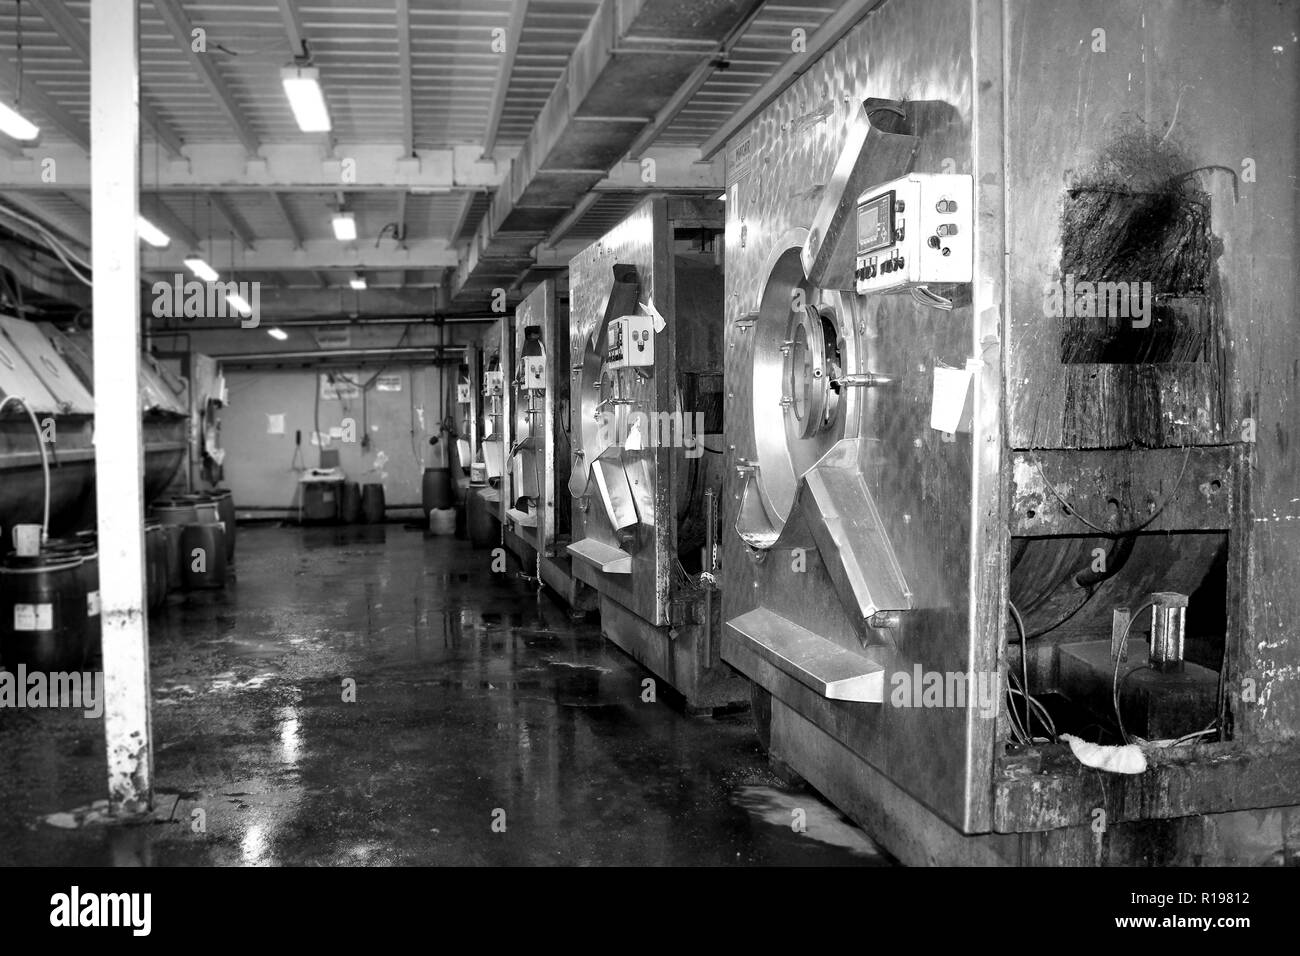 Black and white photo of the old workshop of washing with old washing machines and blue barrels of water Stock Photo